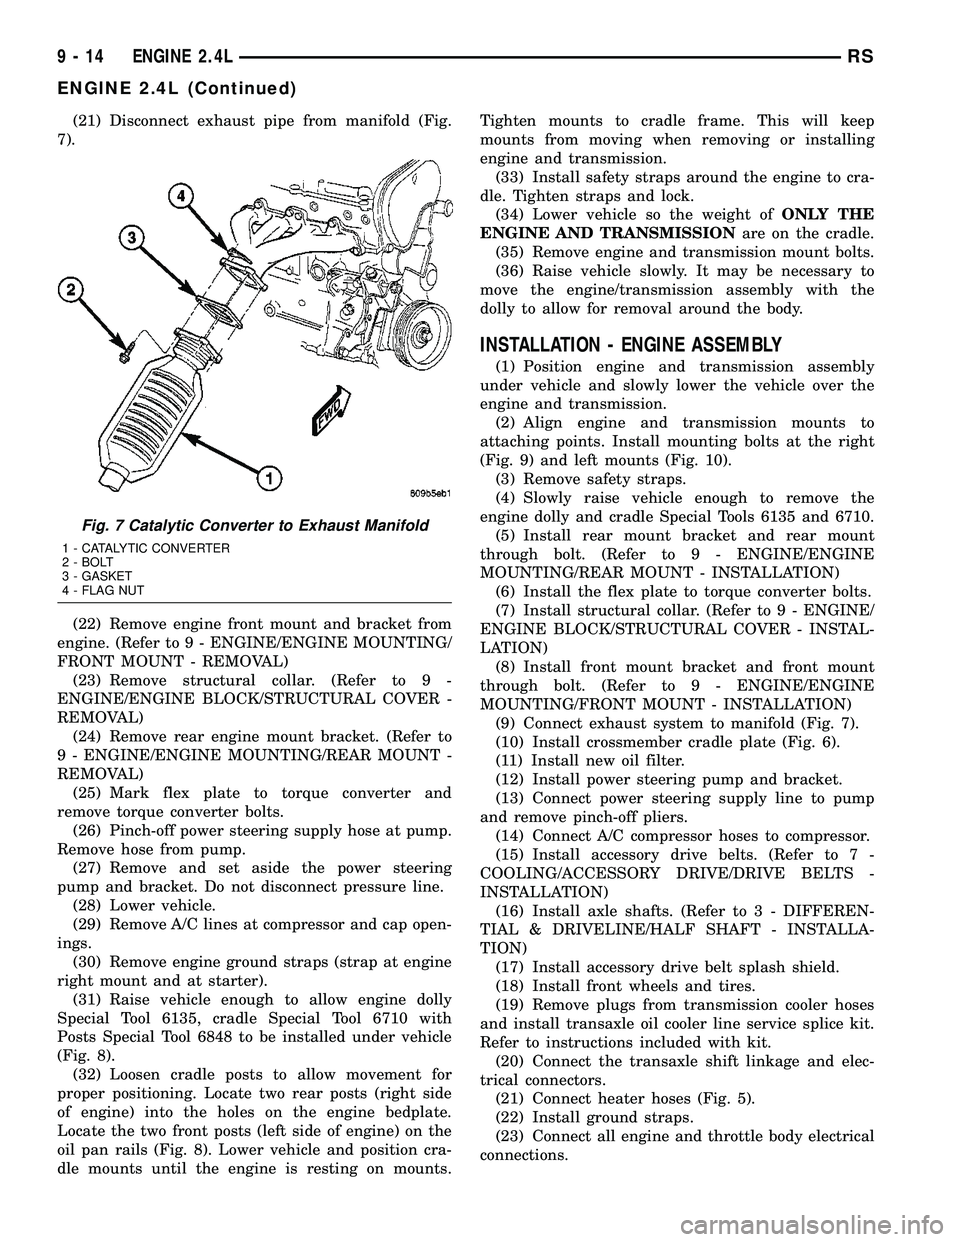 CHRYSLER VOYAGER 2005 Workshop Manual (21) Disconnect exhaust pipe from manifold (Fig.
7).
(22) Remove engine front mount and bracket from
engine. (Refer to 9 - ENGINE/ENGINE MOUNTING/
FRONT MOUNT - REMOVAL)
(23) Remove structural collar.